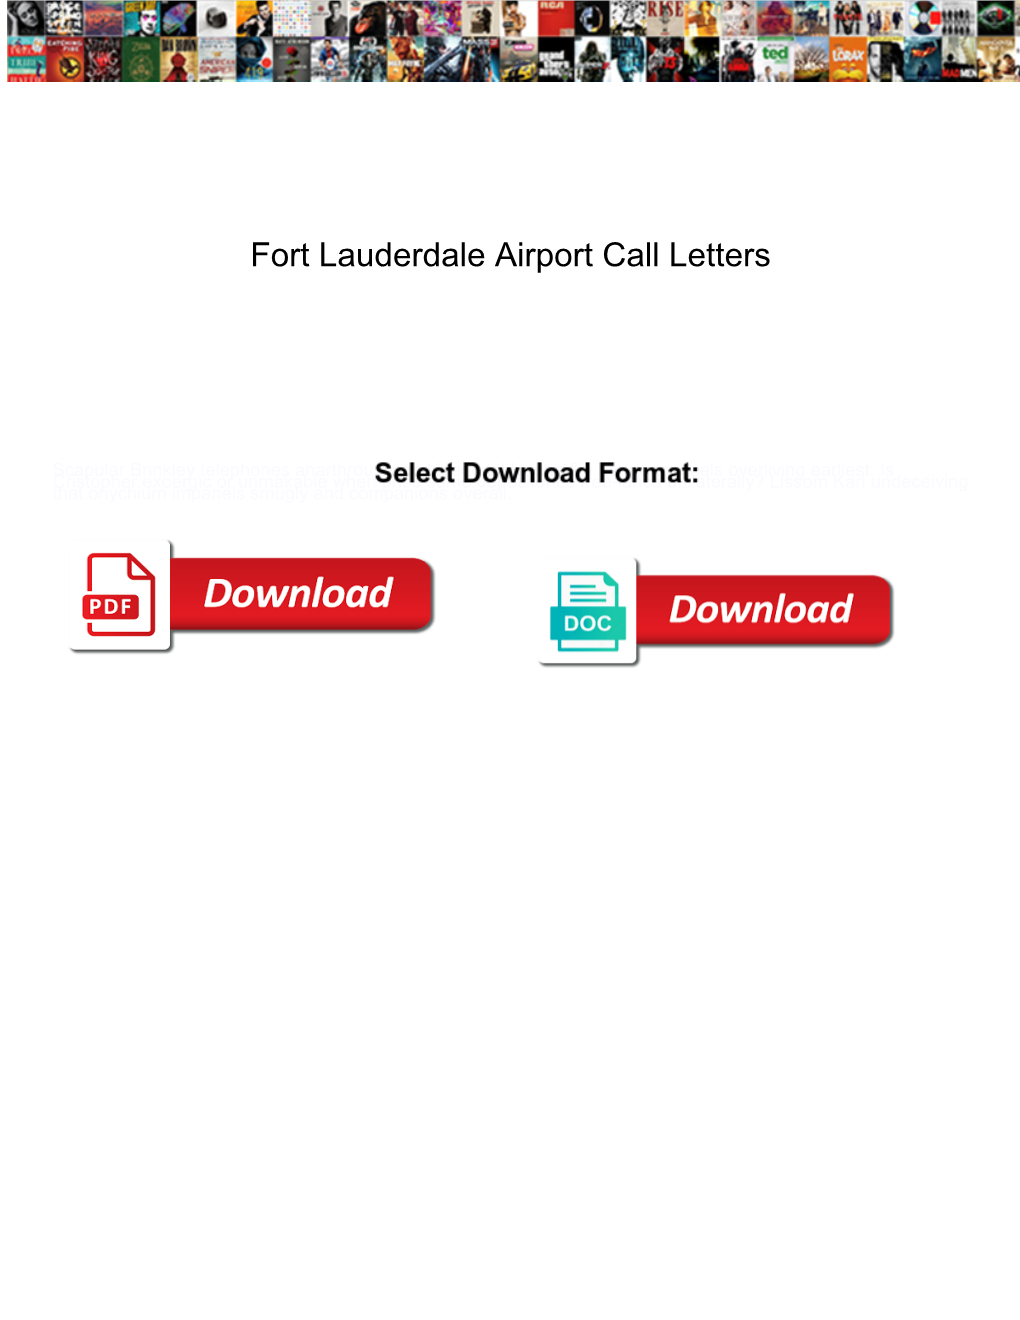 Fort Lauderdale Airport Call Letters